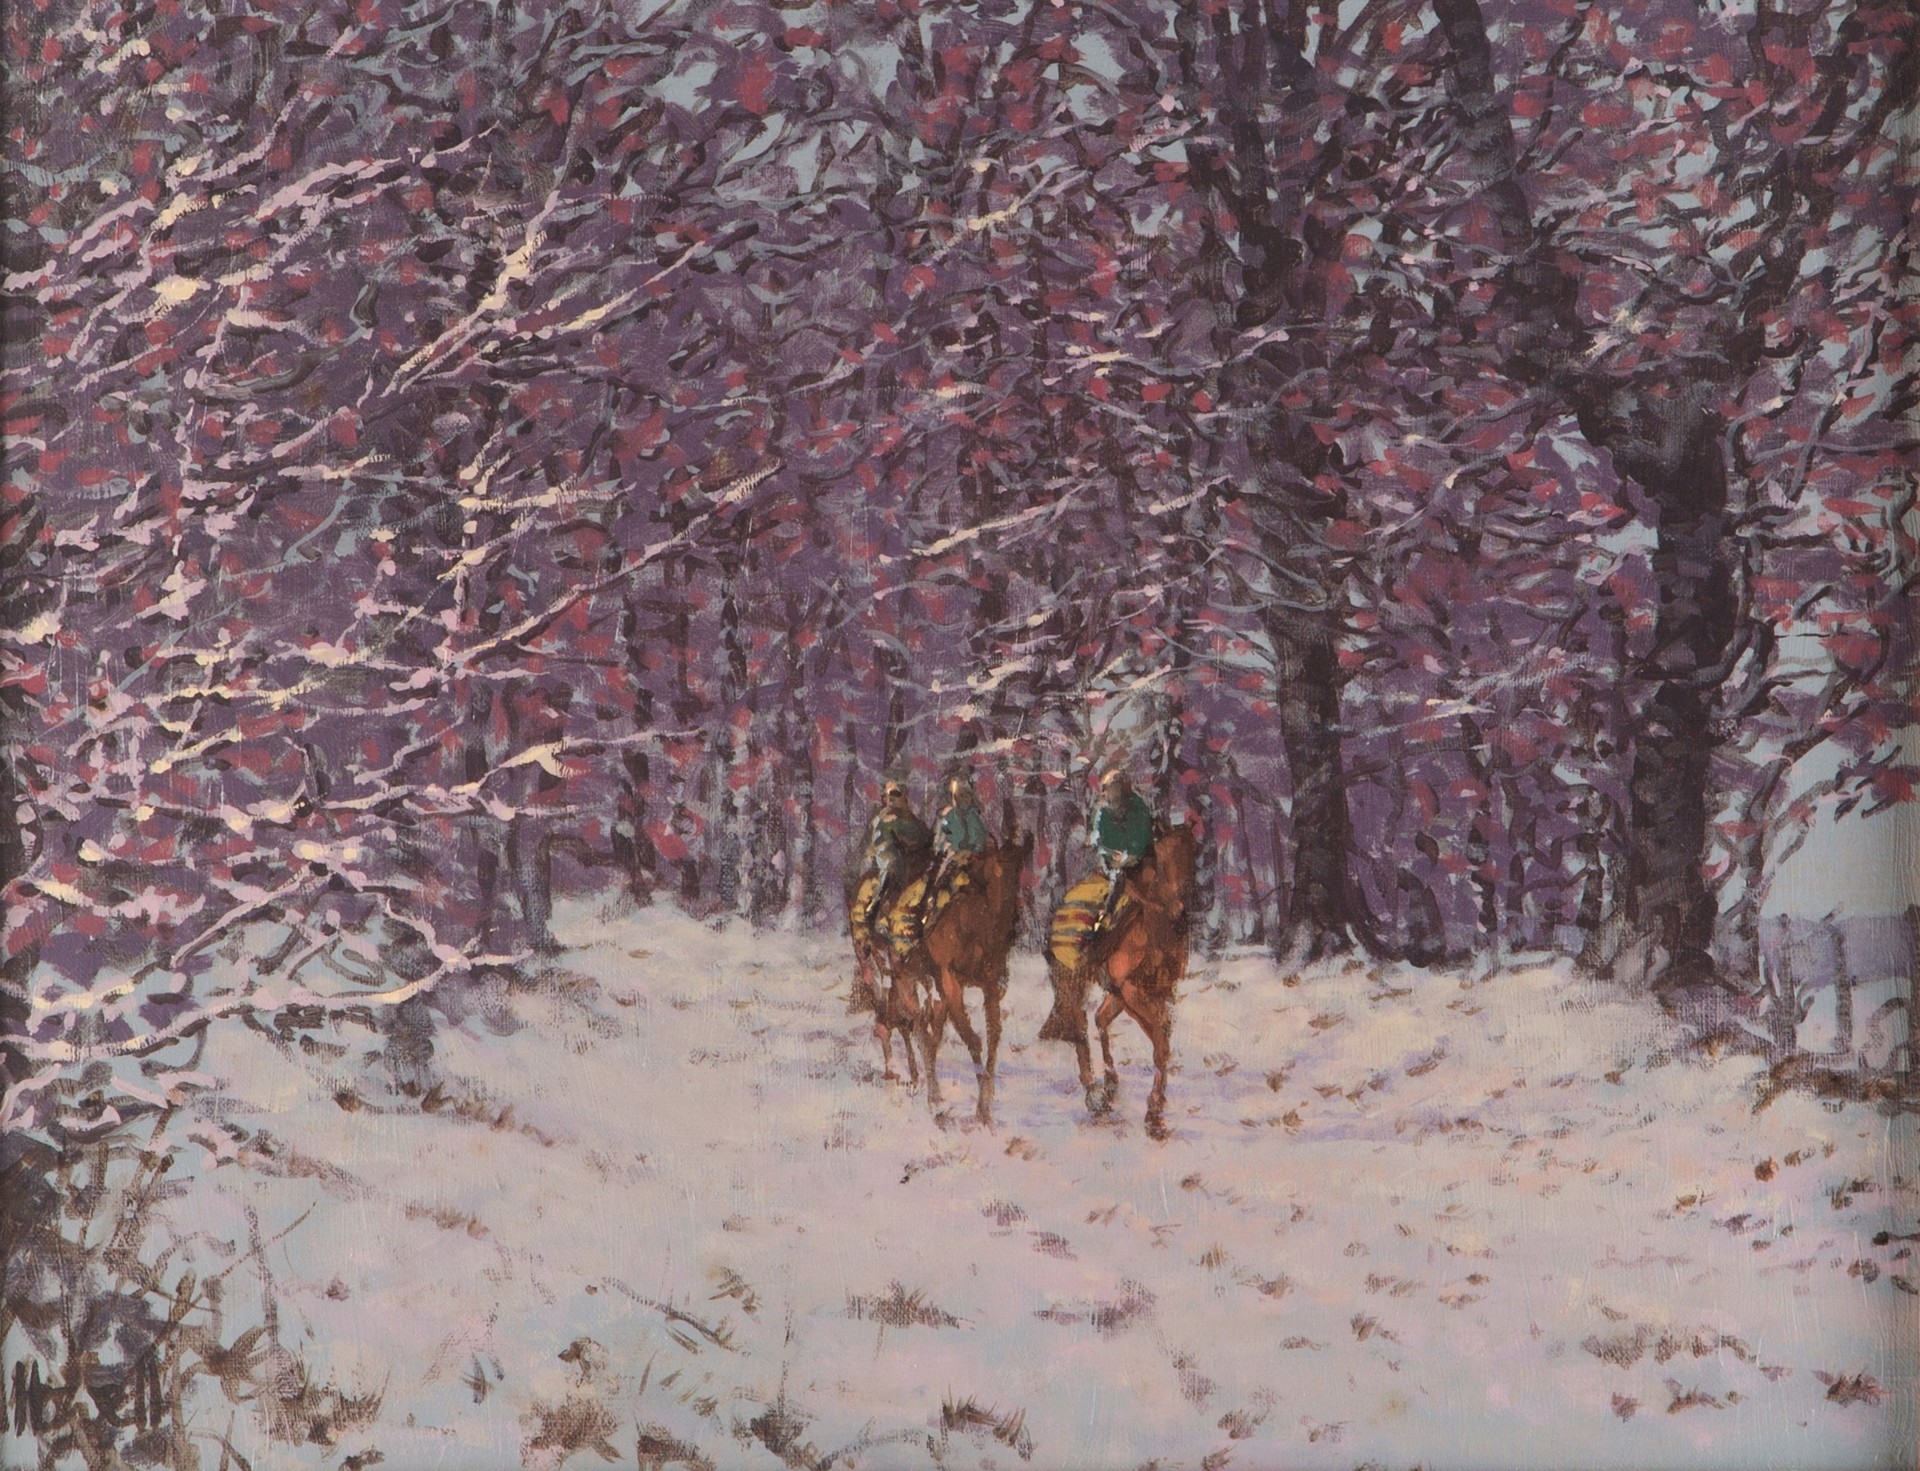 Exercising in the Snow by Peter Howell